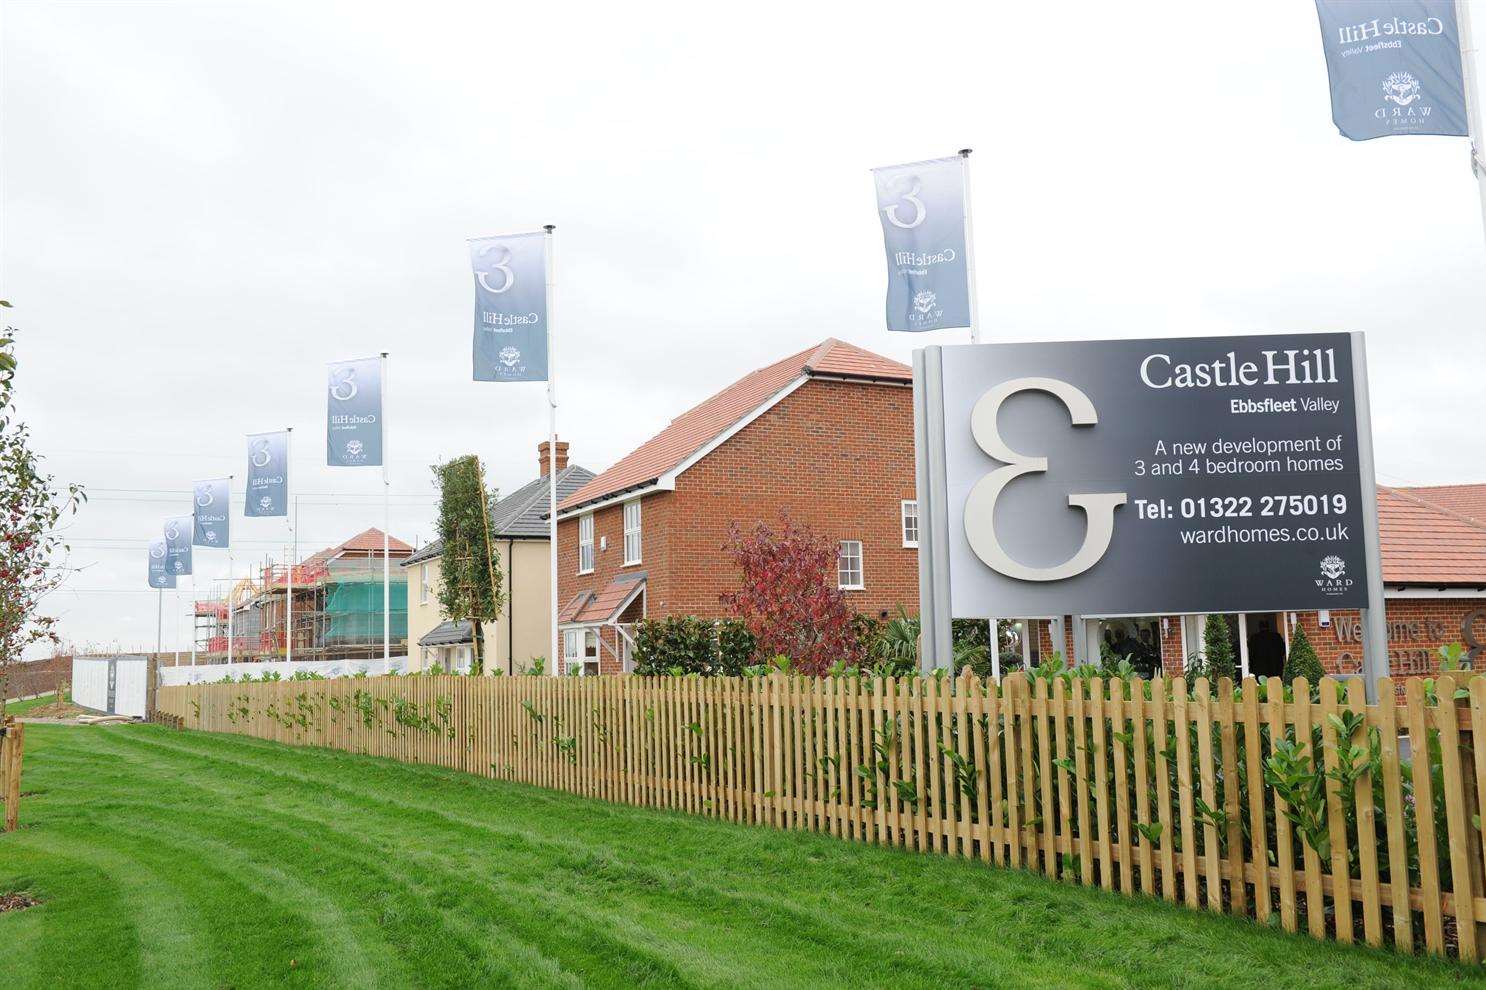 The first show homes at Castle Hill in the Ebbsfleet Valley were revealed in October